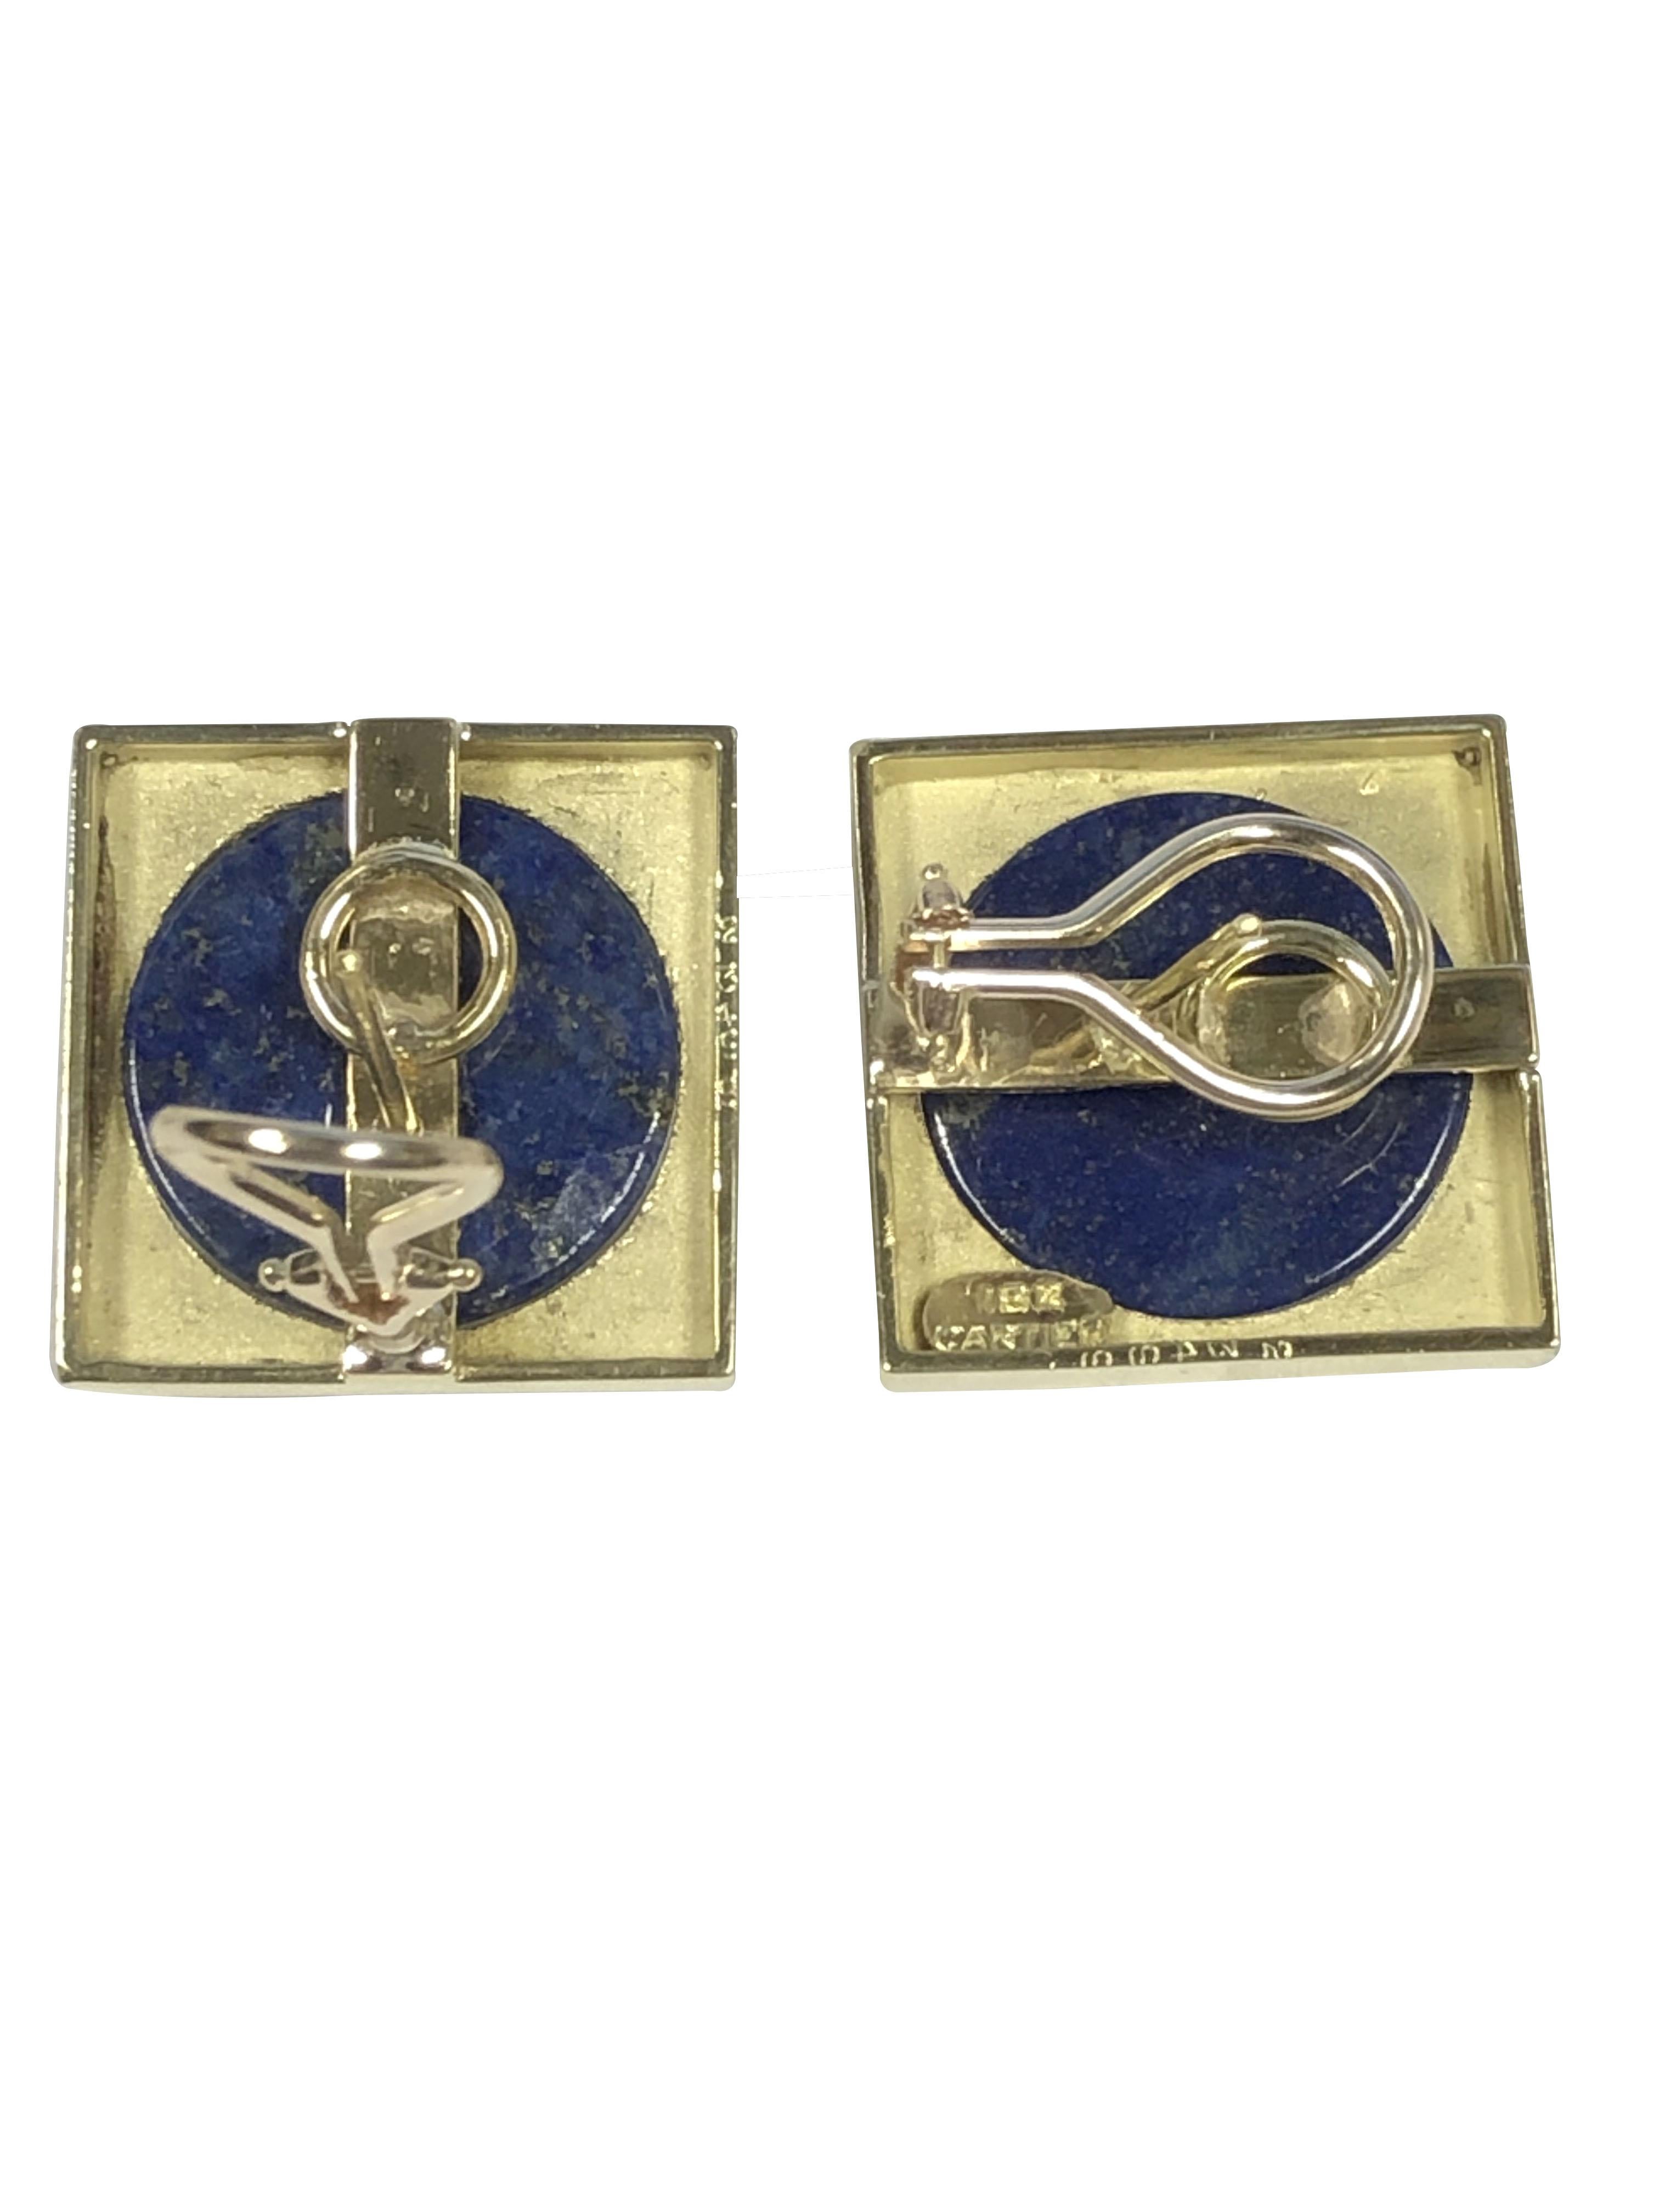 Circa 1960s Cartier 18k Yellow Gold Earrings, measuring 7/8 x 7/8 inch and centrally set with a domed Cabochon Lapis Lazuli, nice solid construction with a weight of 20.9 Grams. One earring has a signature and both have Cartier control numbers.